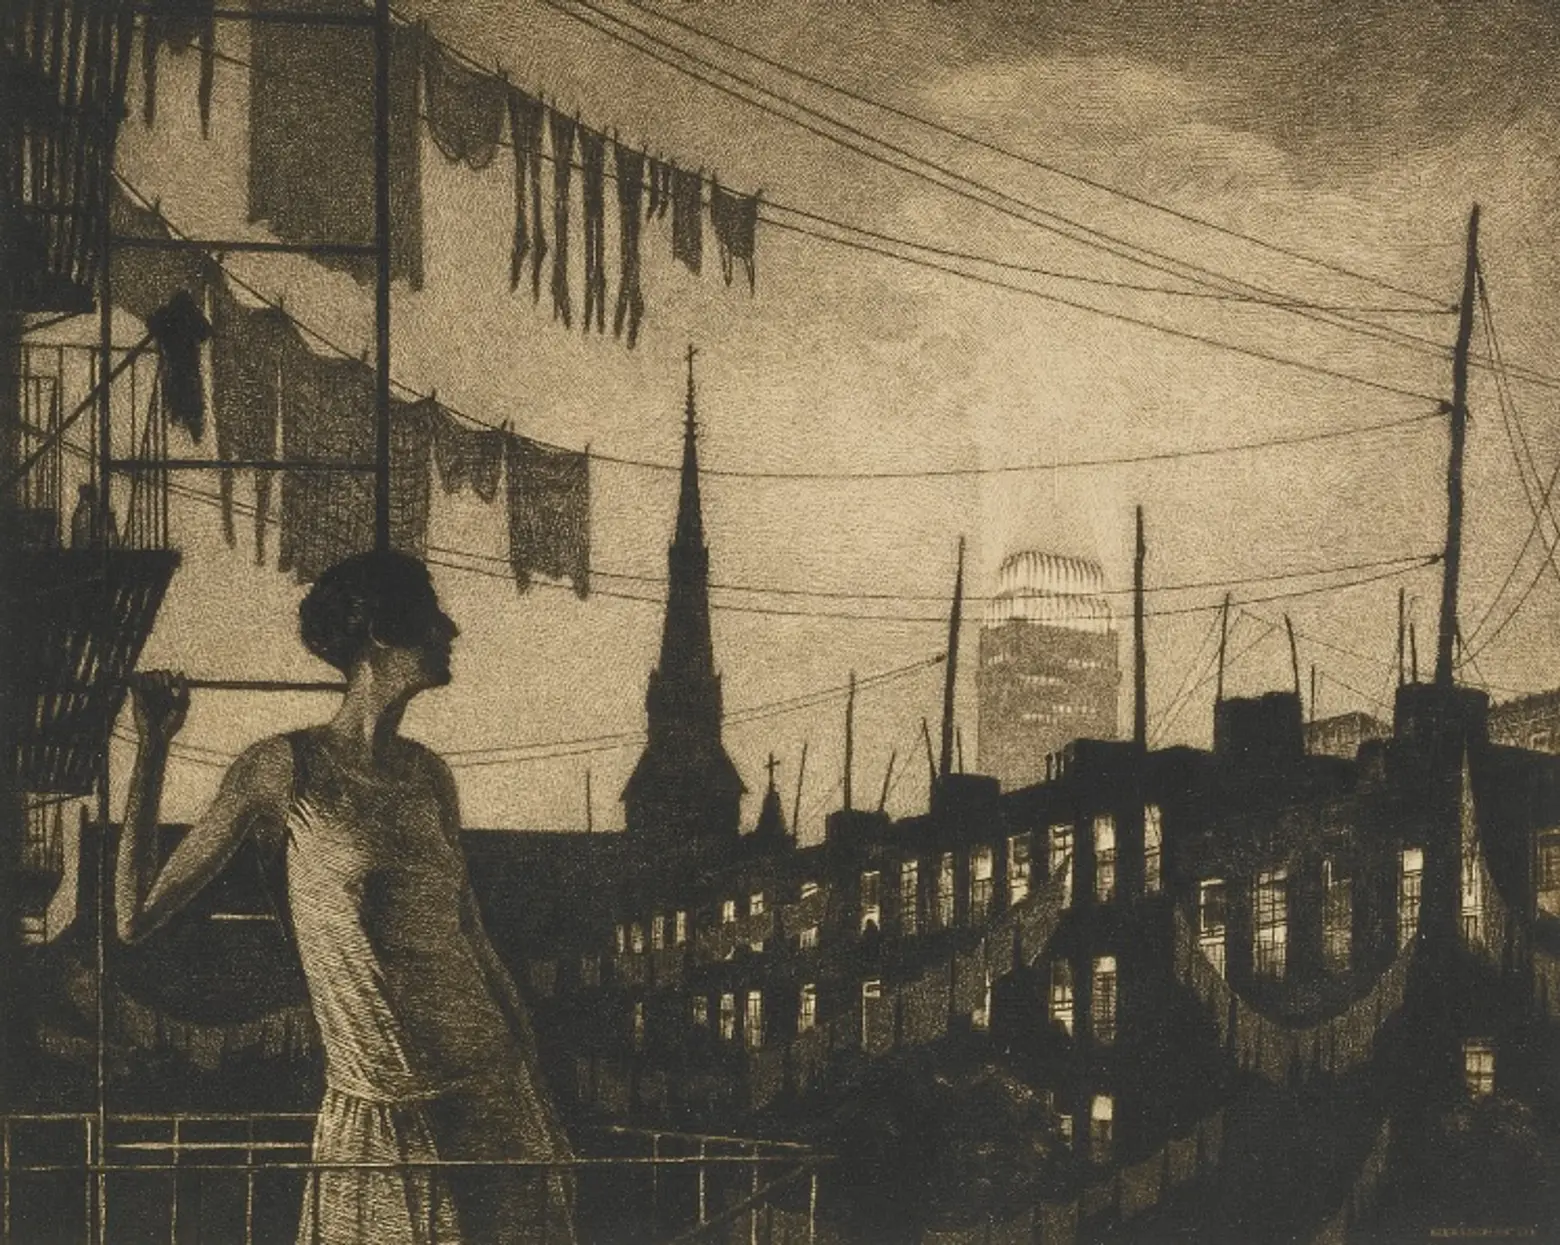 Glow of the City by Martin Lewis